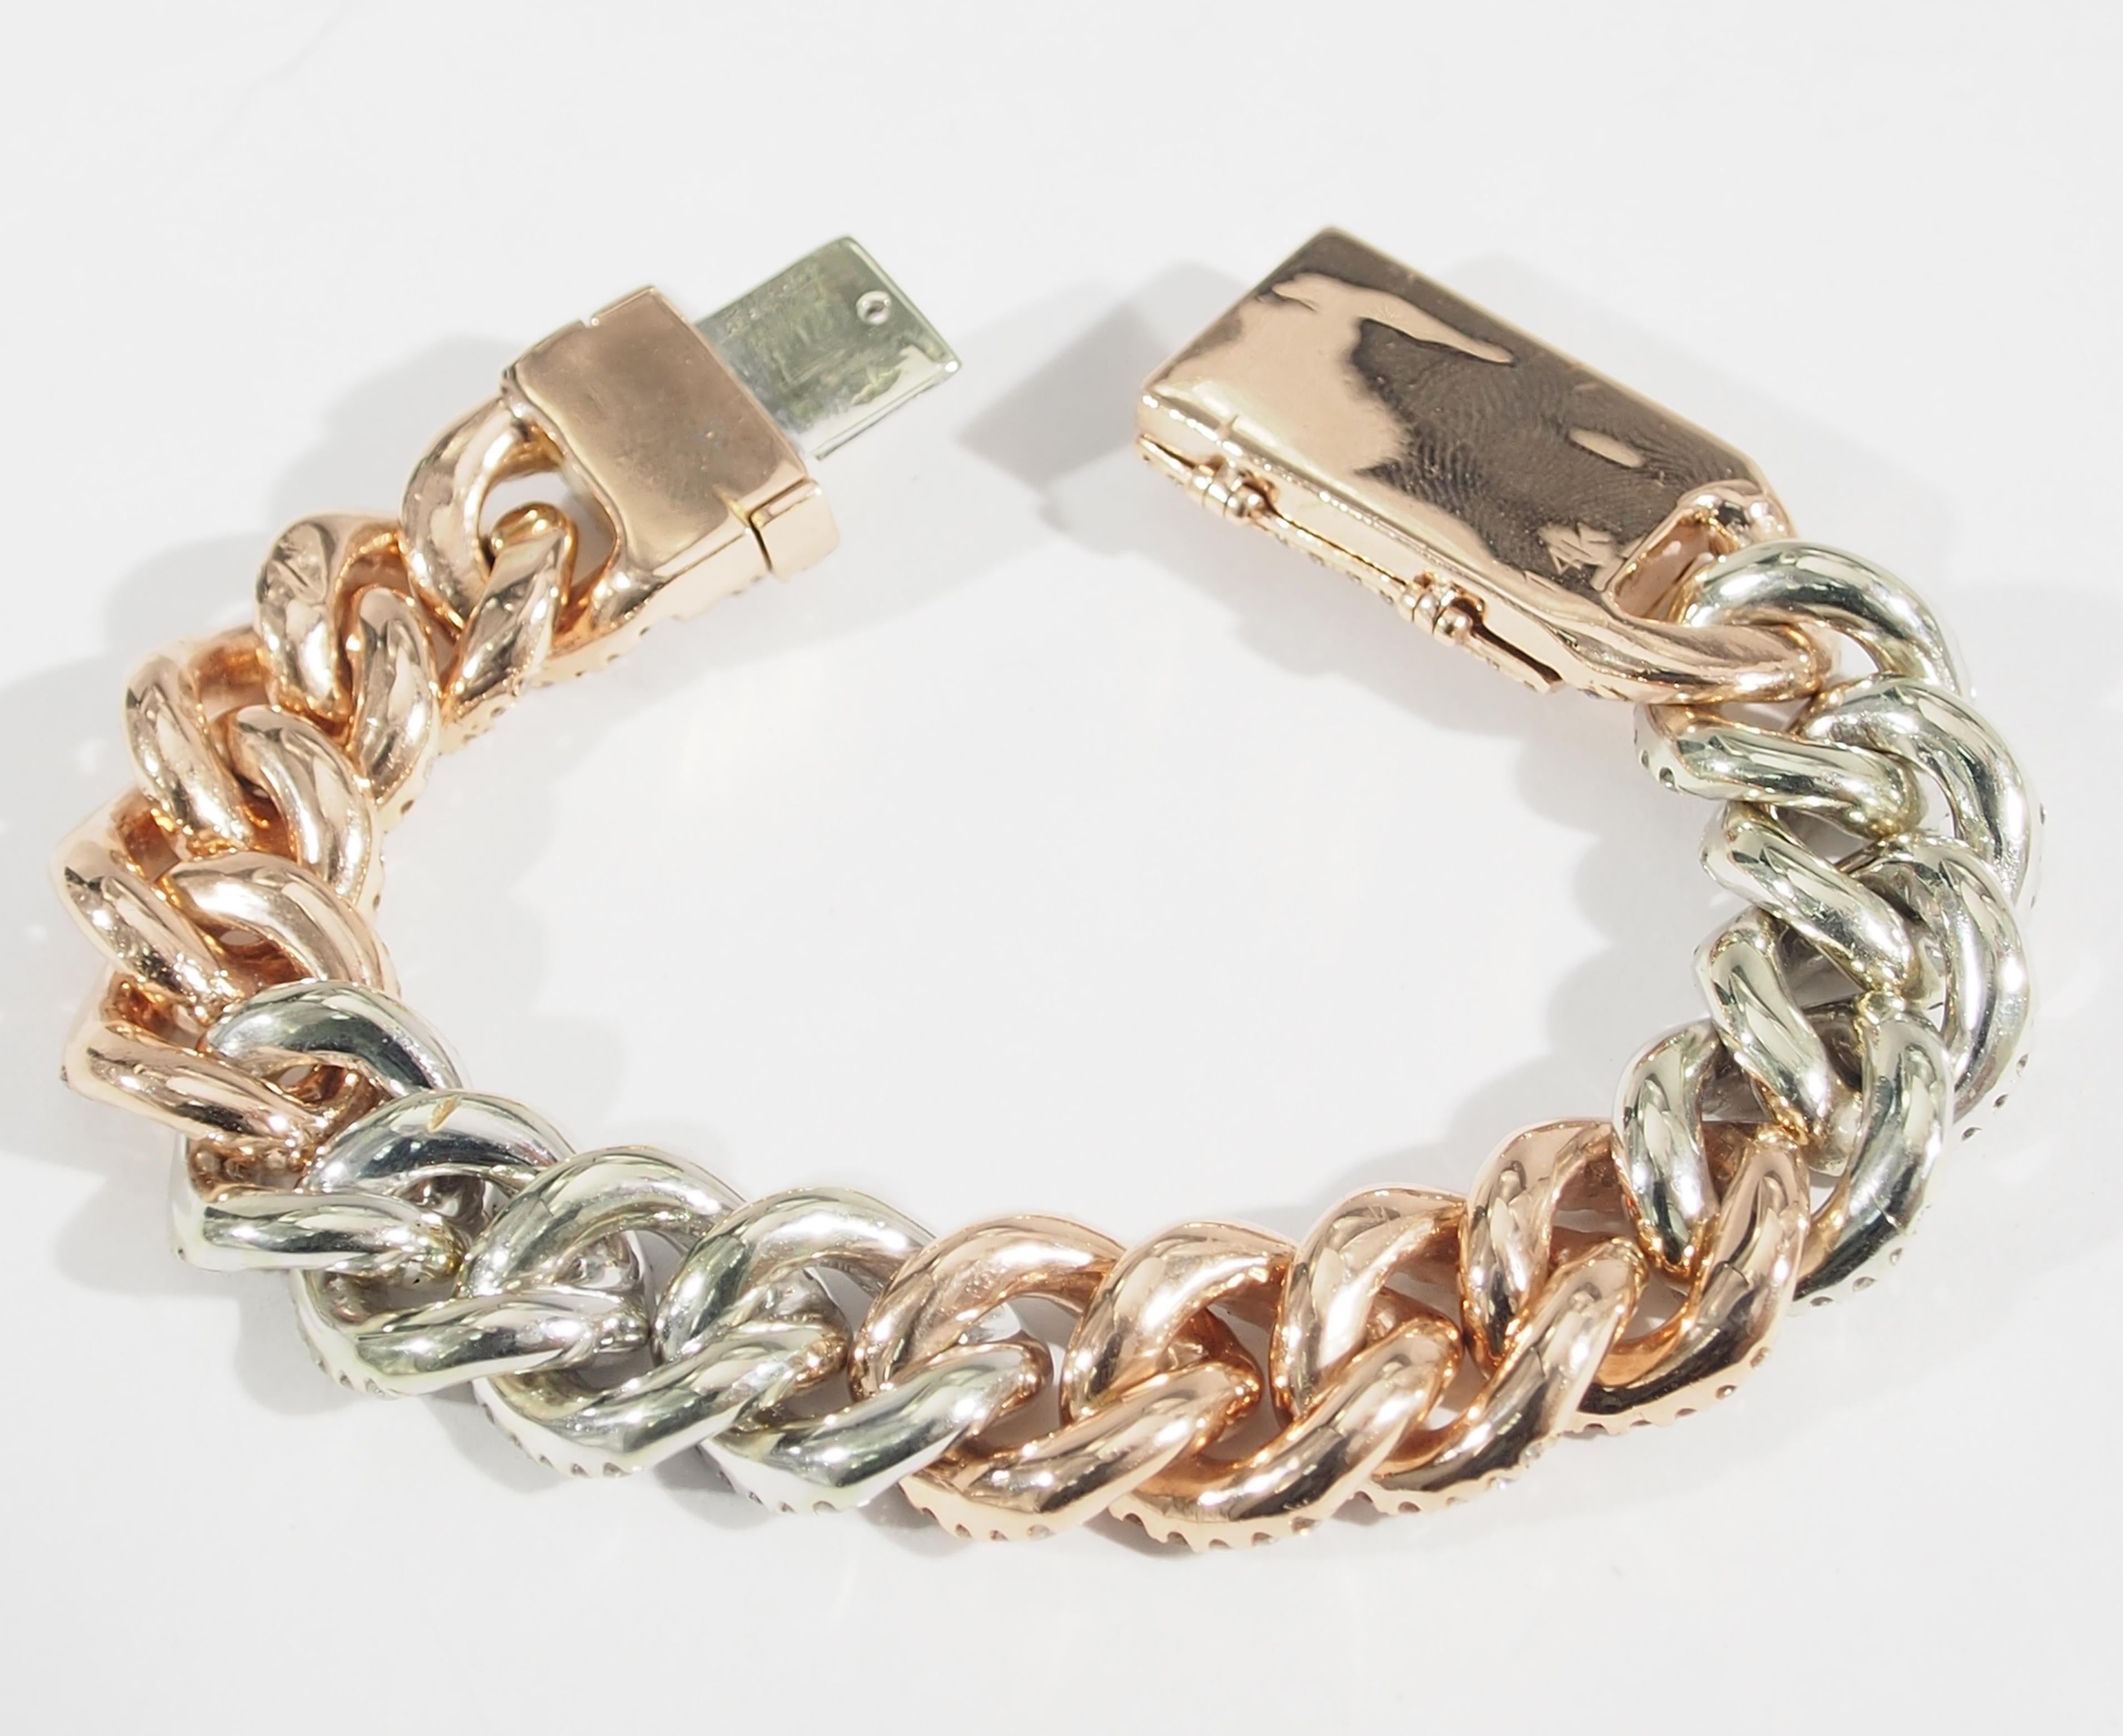 This is a Stunning 14K White and Rose Gold Solid Link Bracelet. Set with 639 Round Brilliant Cut Diamonds, G-I in Color, SI-I1 in Clarity approximately 12 total weight. The bracelet weighs 74.18 grams and secured with a Tongue Clasp. 7 1/2